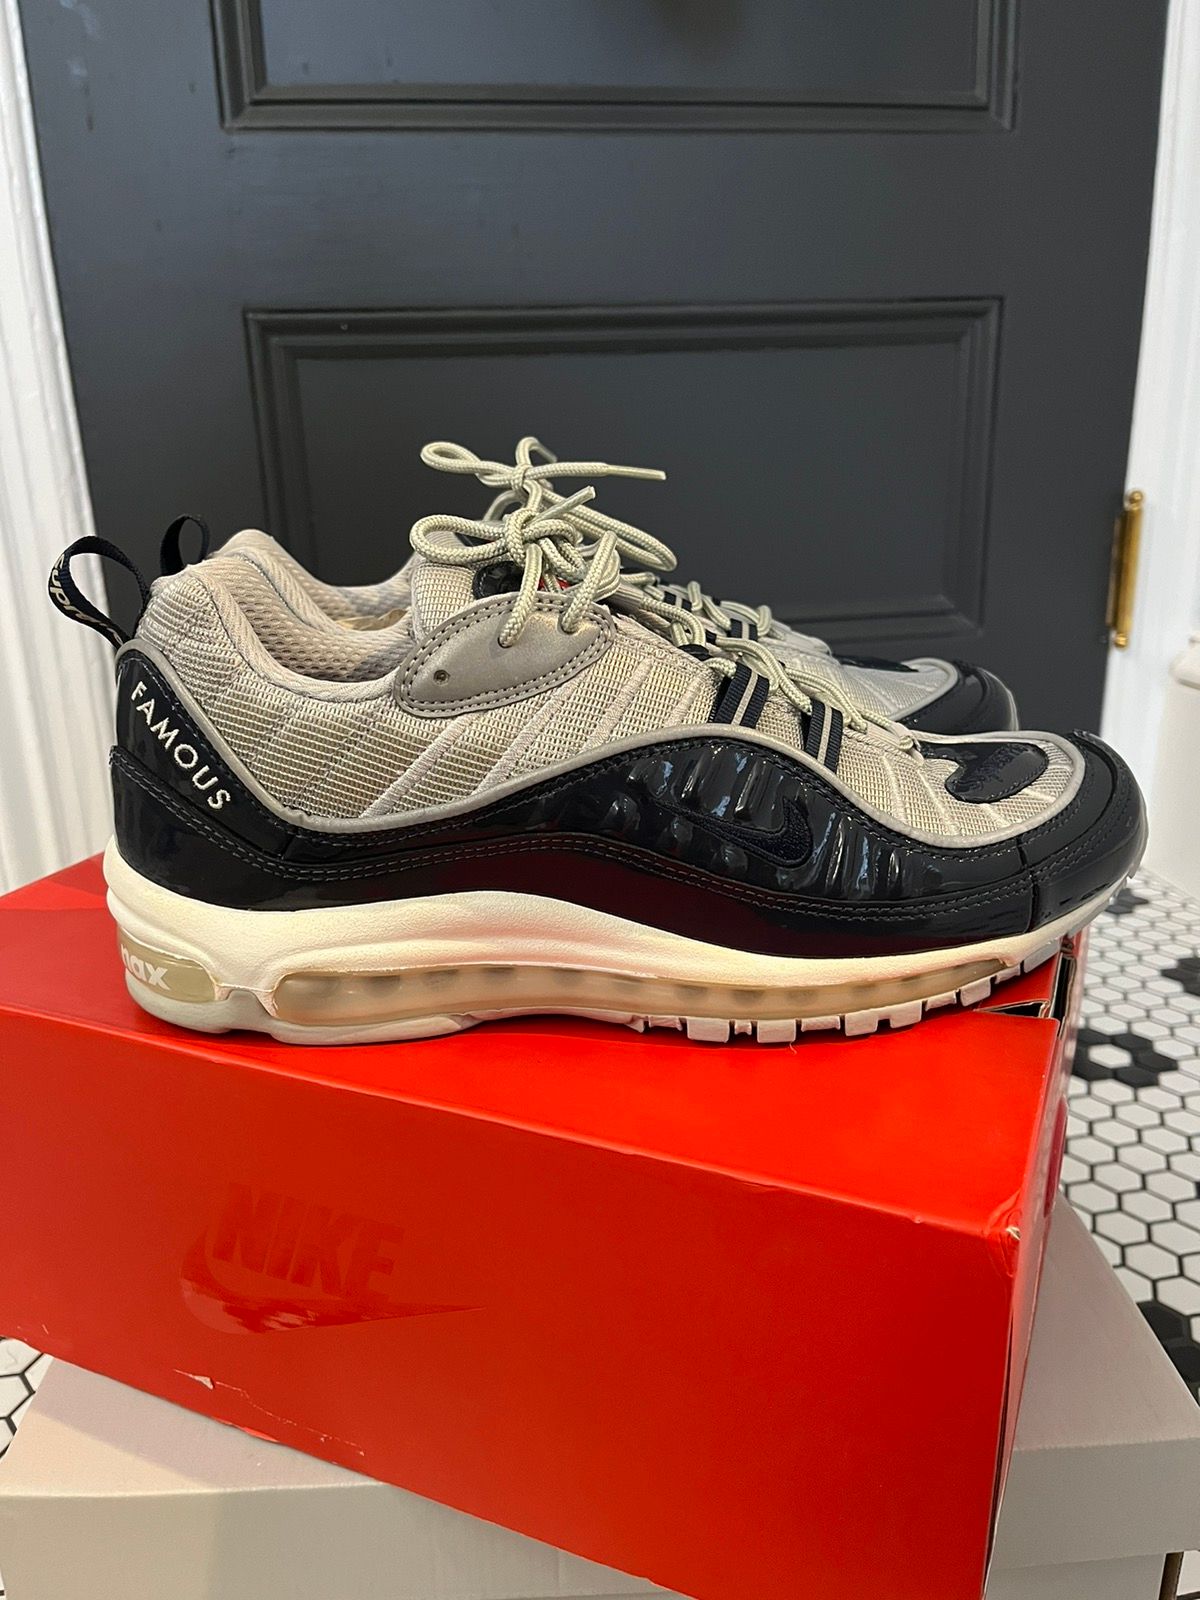 Pre-owned Nike X Supreme Nike Air Max ‘98 Obsidian / Navy / Silver - Size 10 Shoes In Obsidian Navy